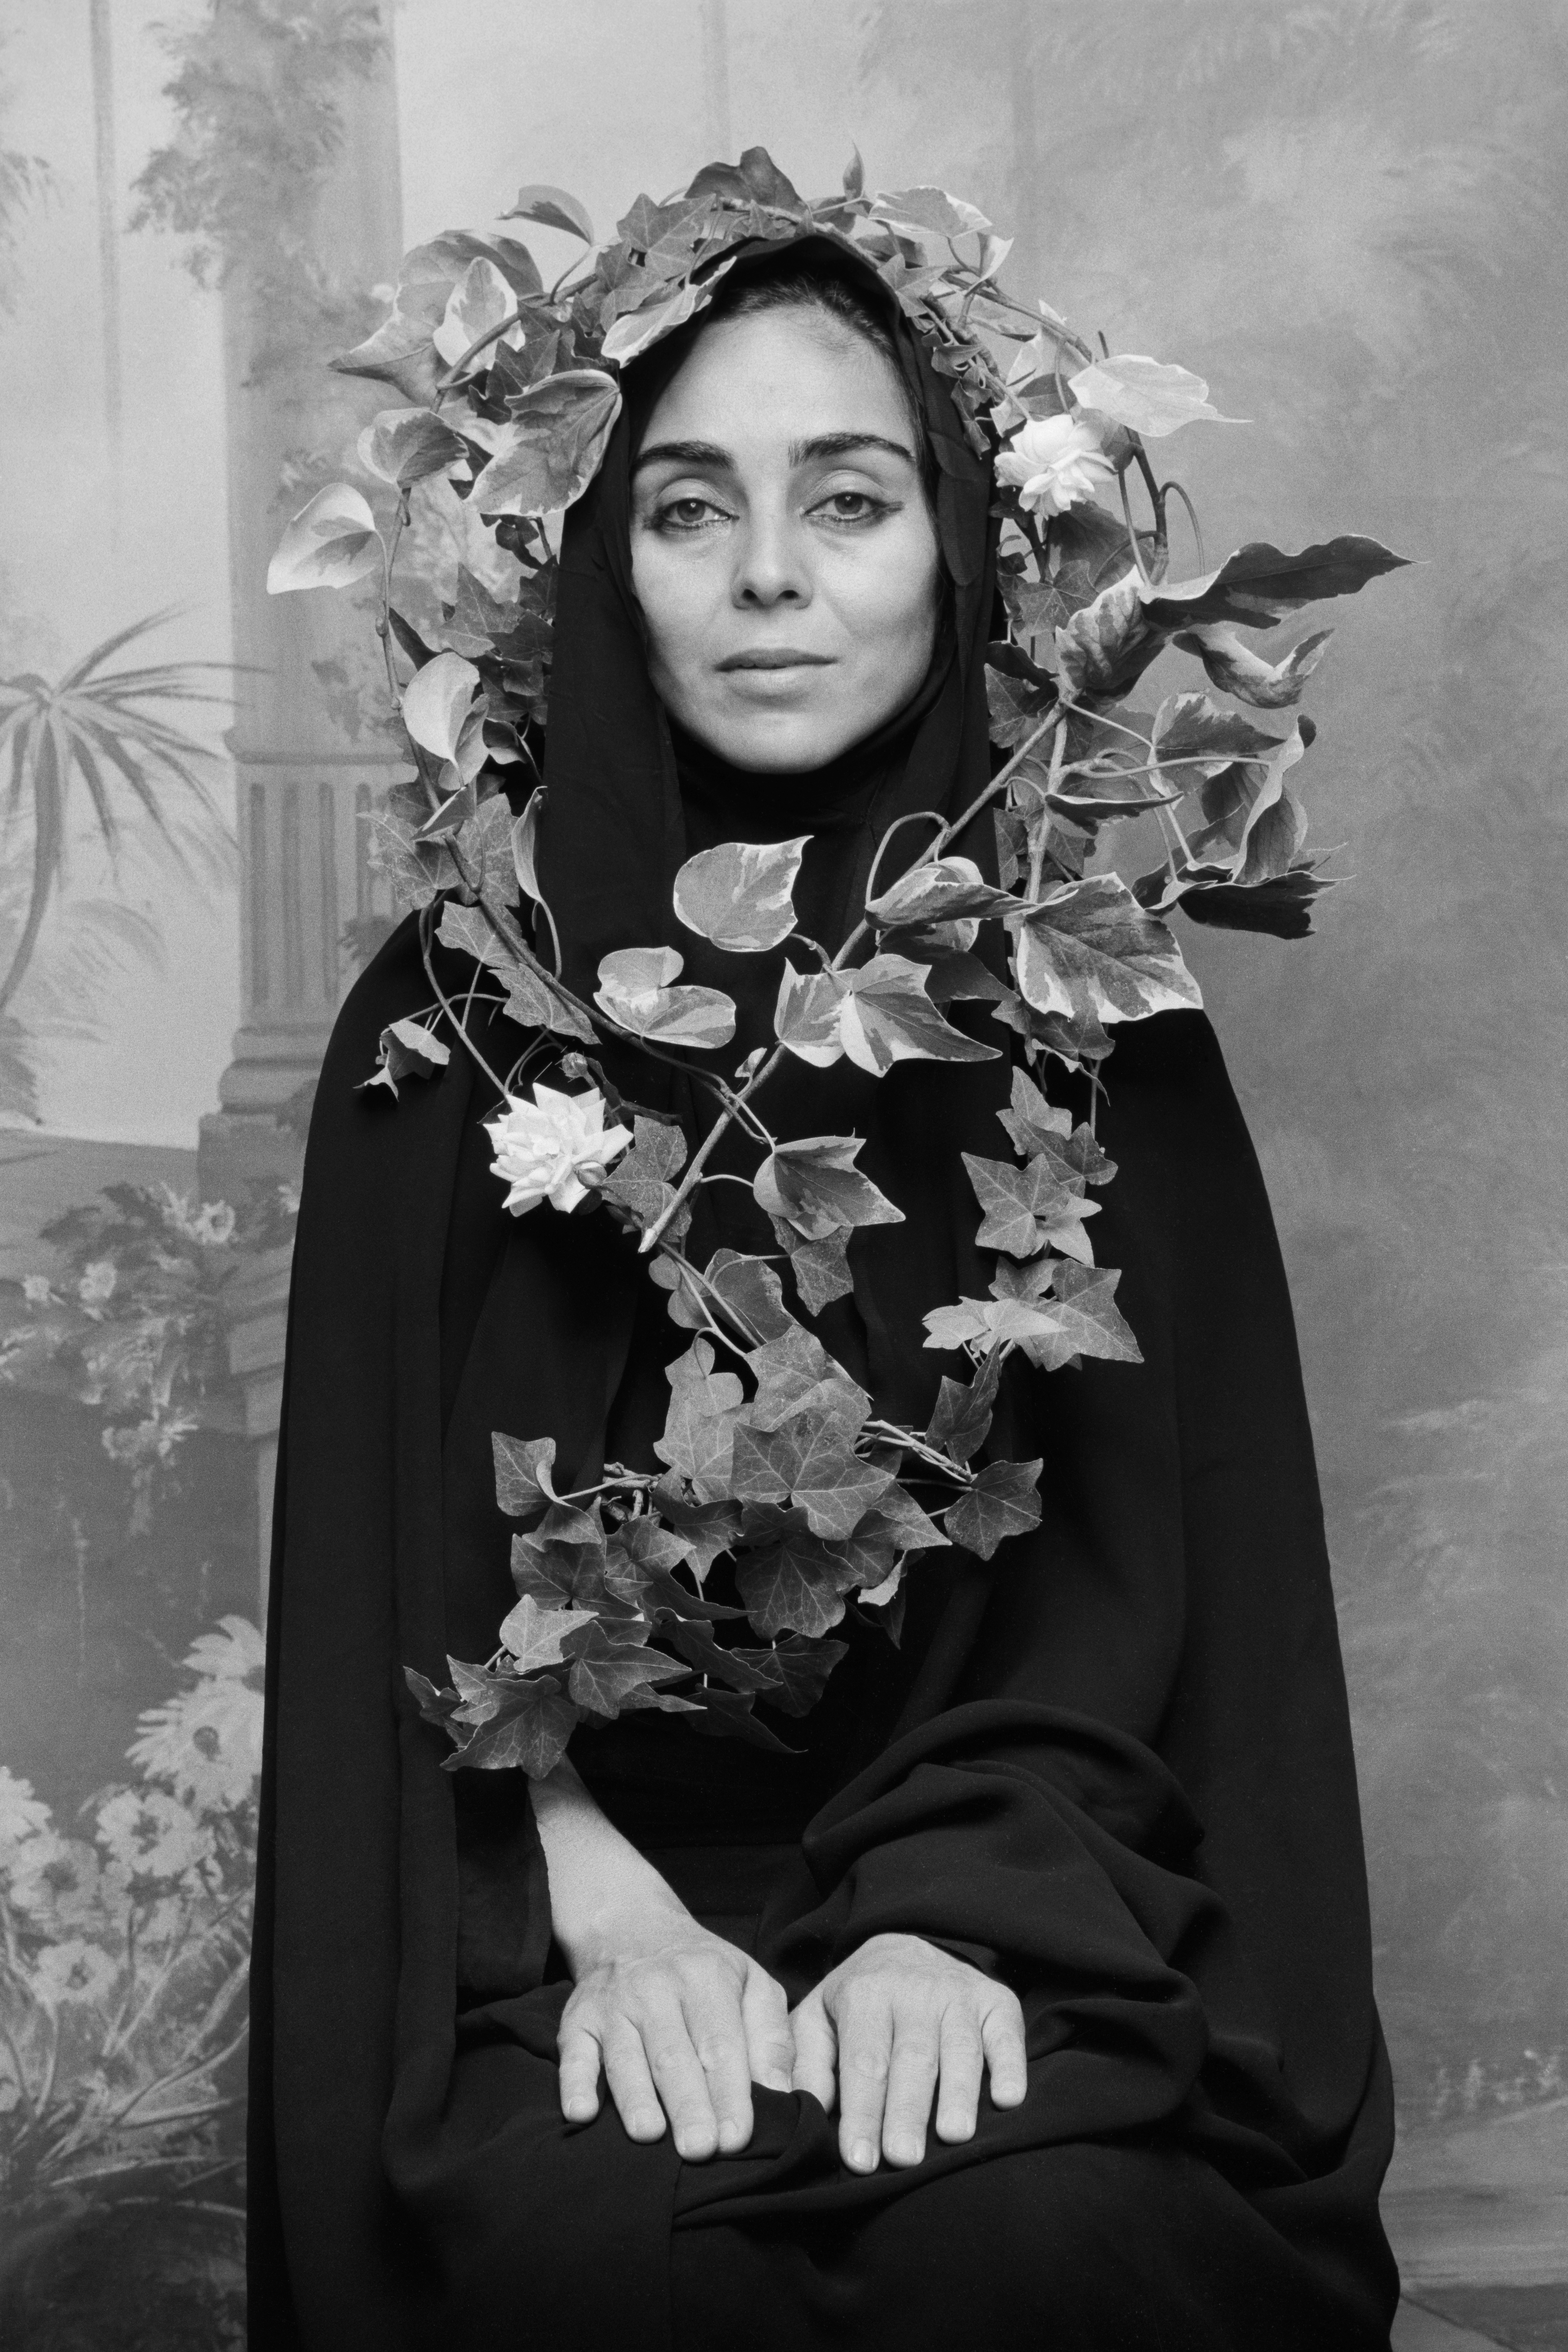 Shirin Neshat - Untitled (from "Women of Allah" series), 1995, LE silver gelatin print